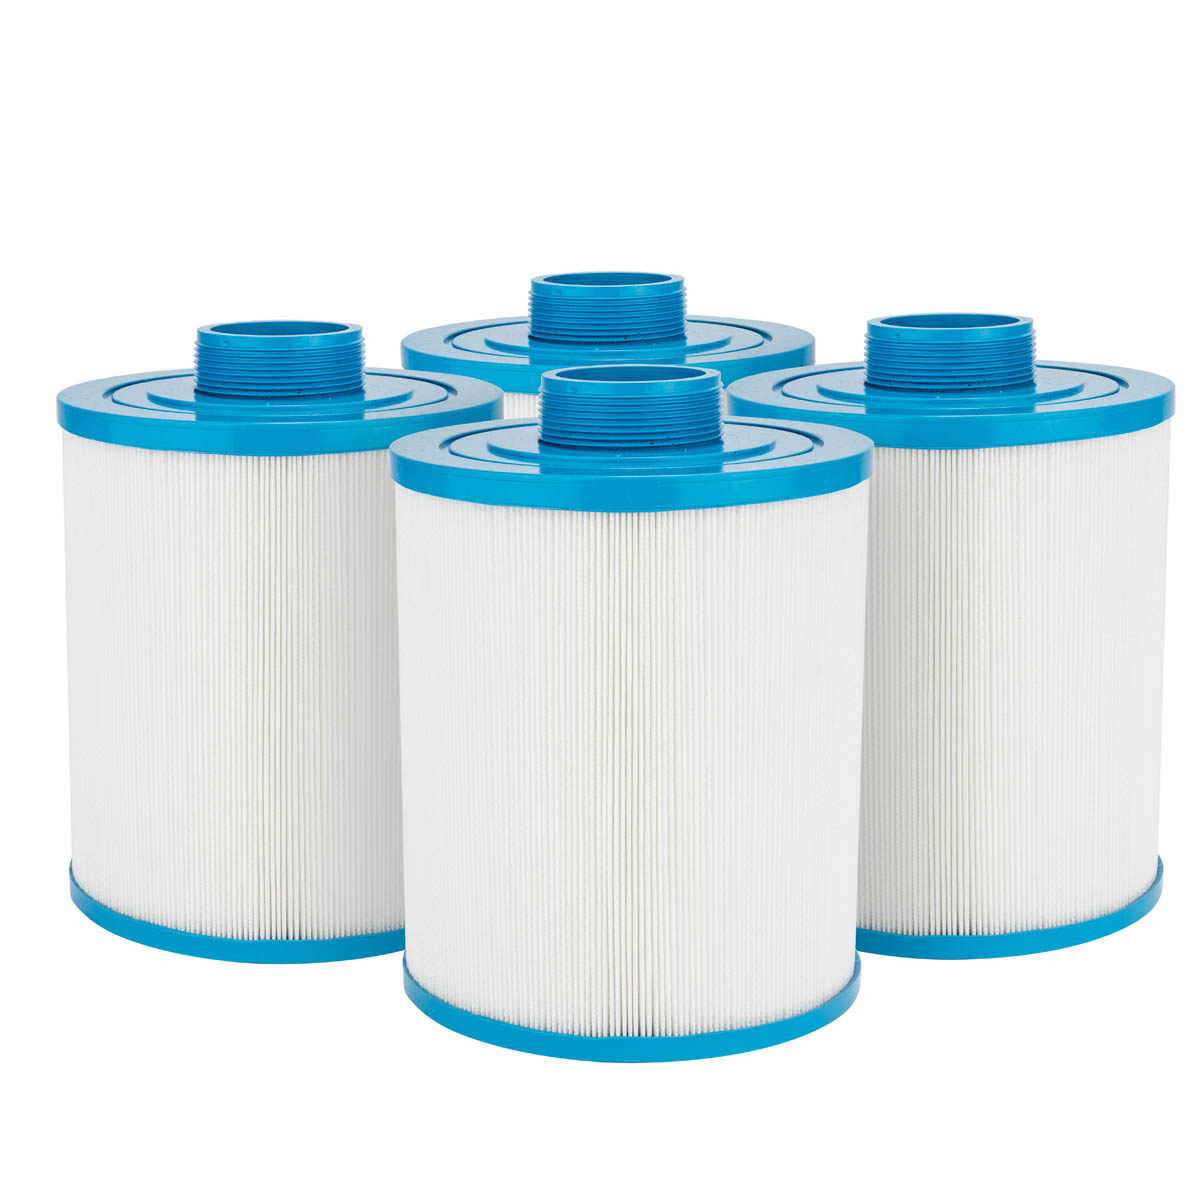 ClearChoice Replacement filter for Filbur FC-0312, 4-Pack